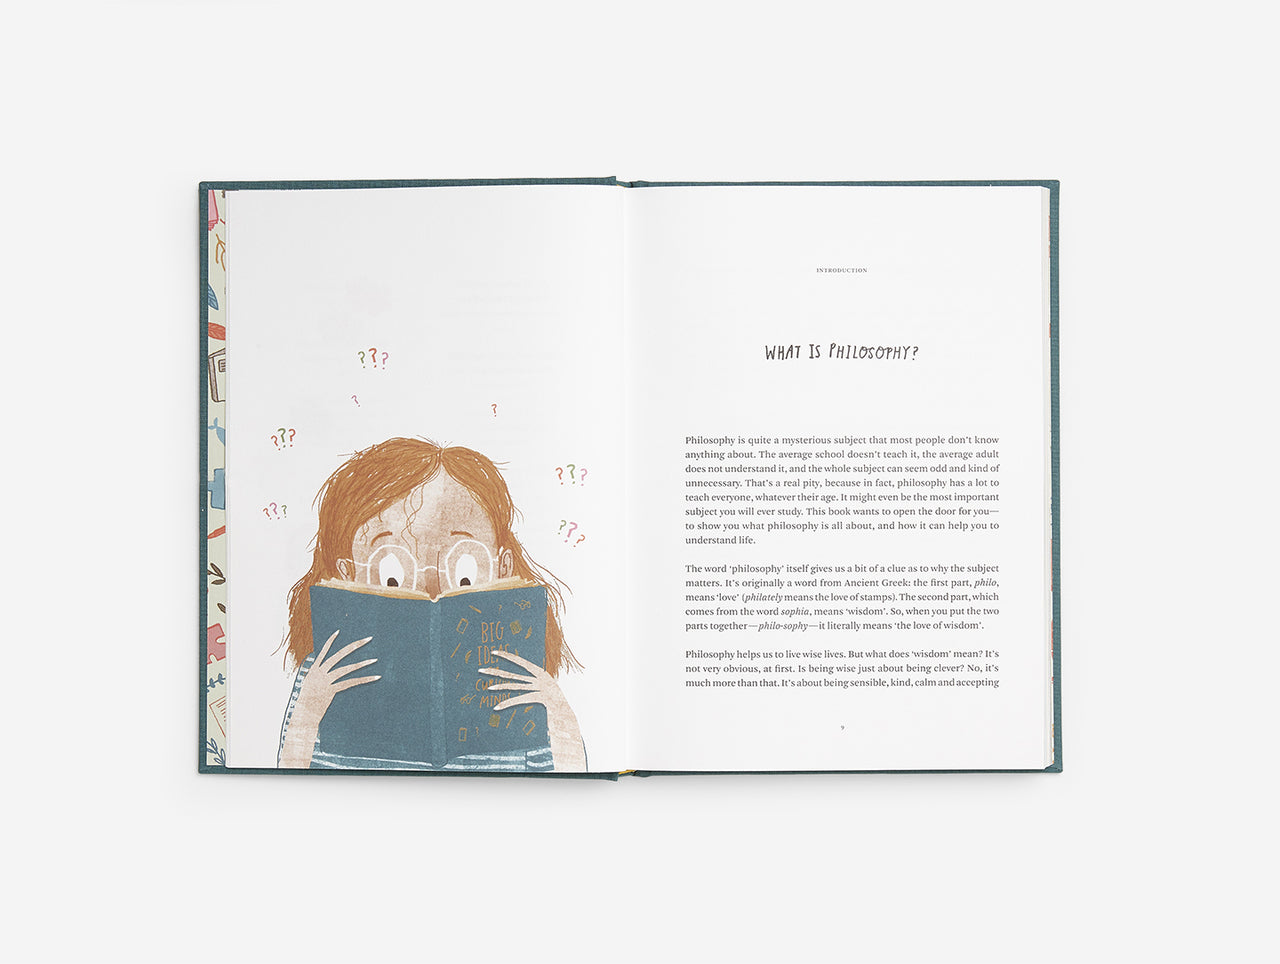 The Every Space hardback clothbound Big Ideas for Curious Minds children's philosophy book with illustrations by Anna Doherty and published by School of Life